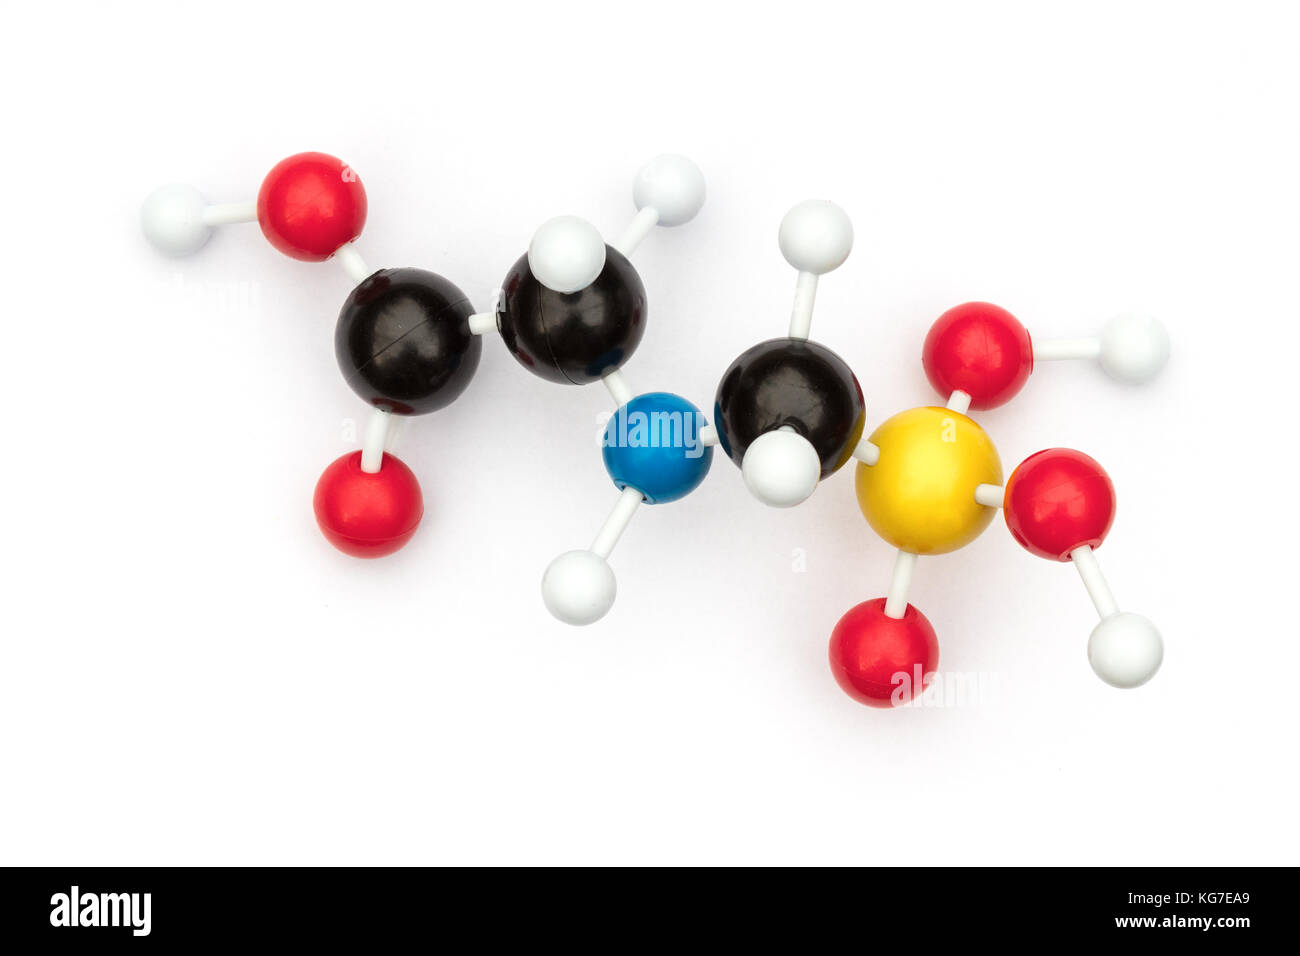 Plastic ball-and-stick model of the systemic herbicide glyphosate (chemical formula: C3H8NO5P) on a white background. Stock Photo